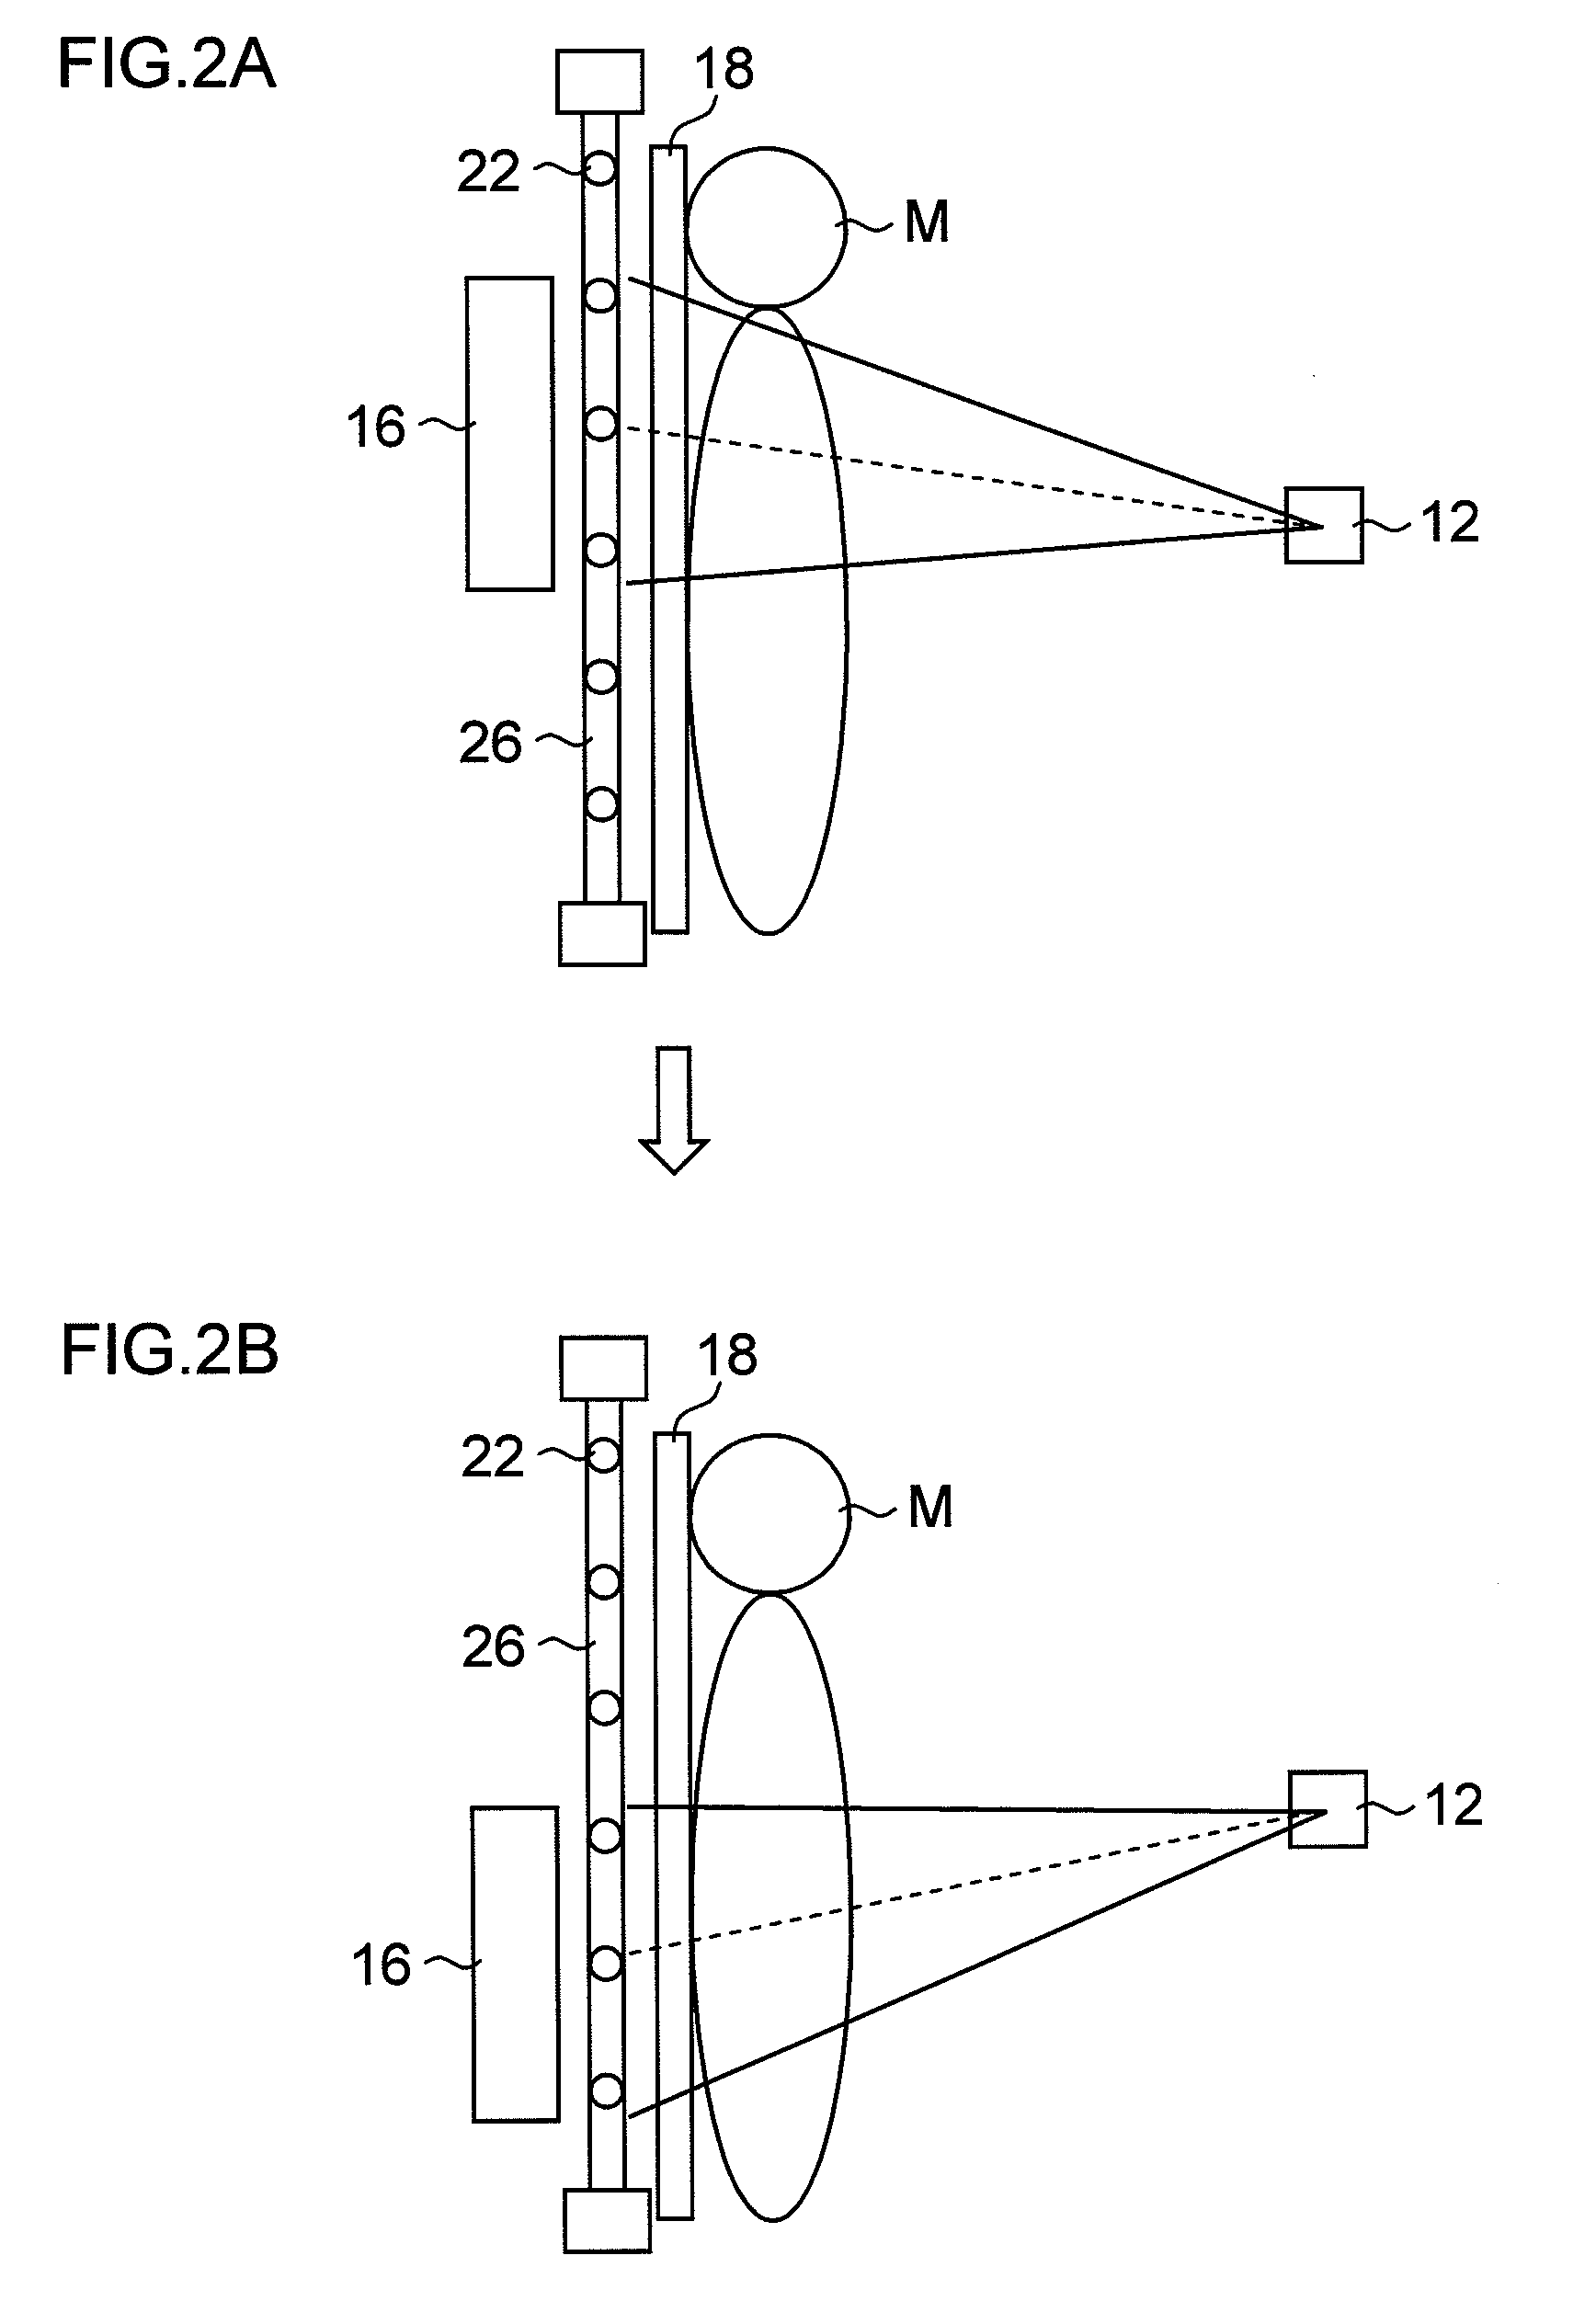 Imaging support device for radiographic long length imaging